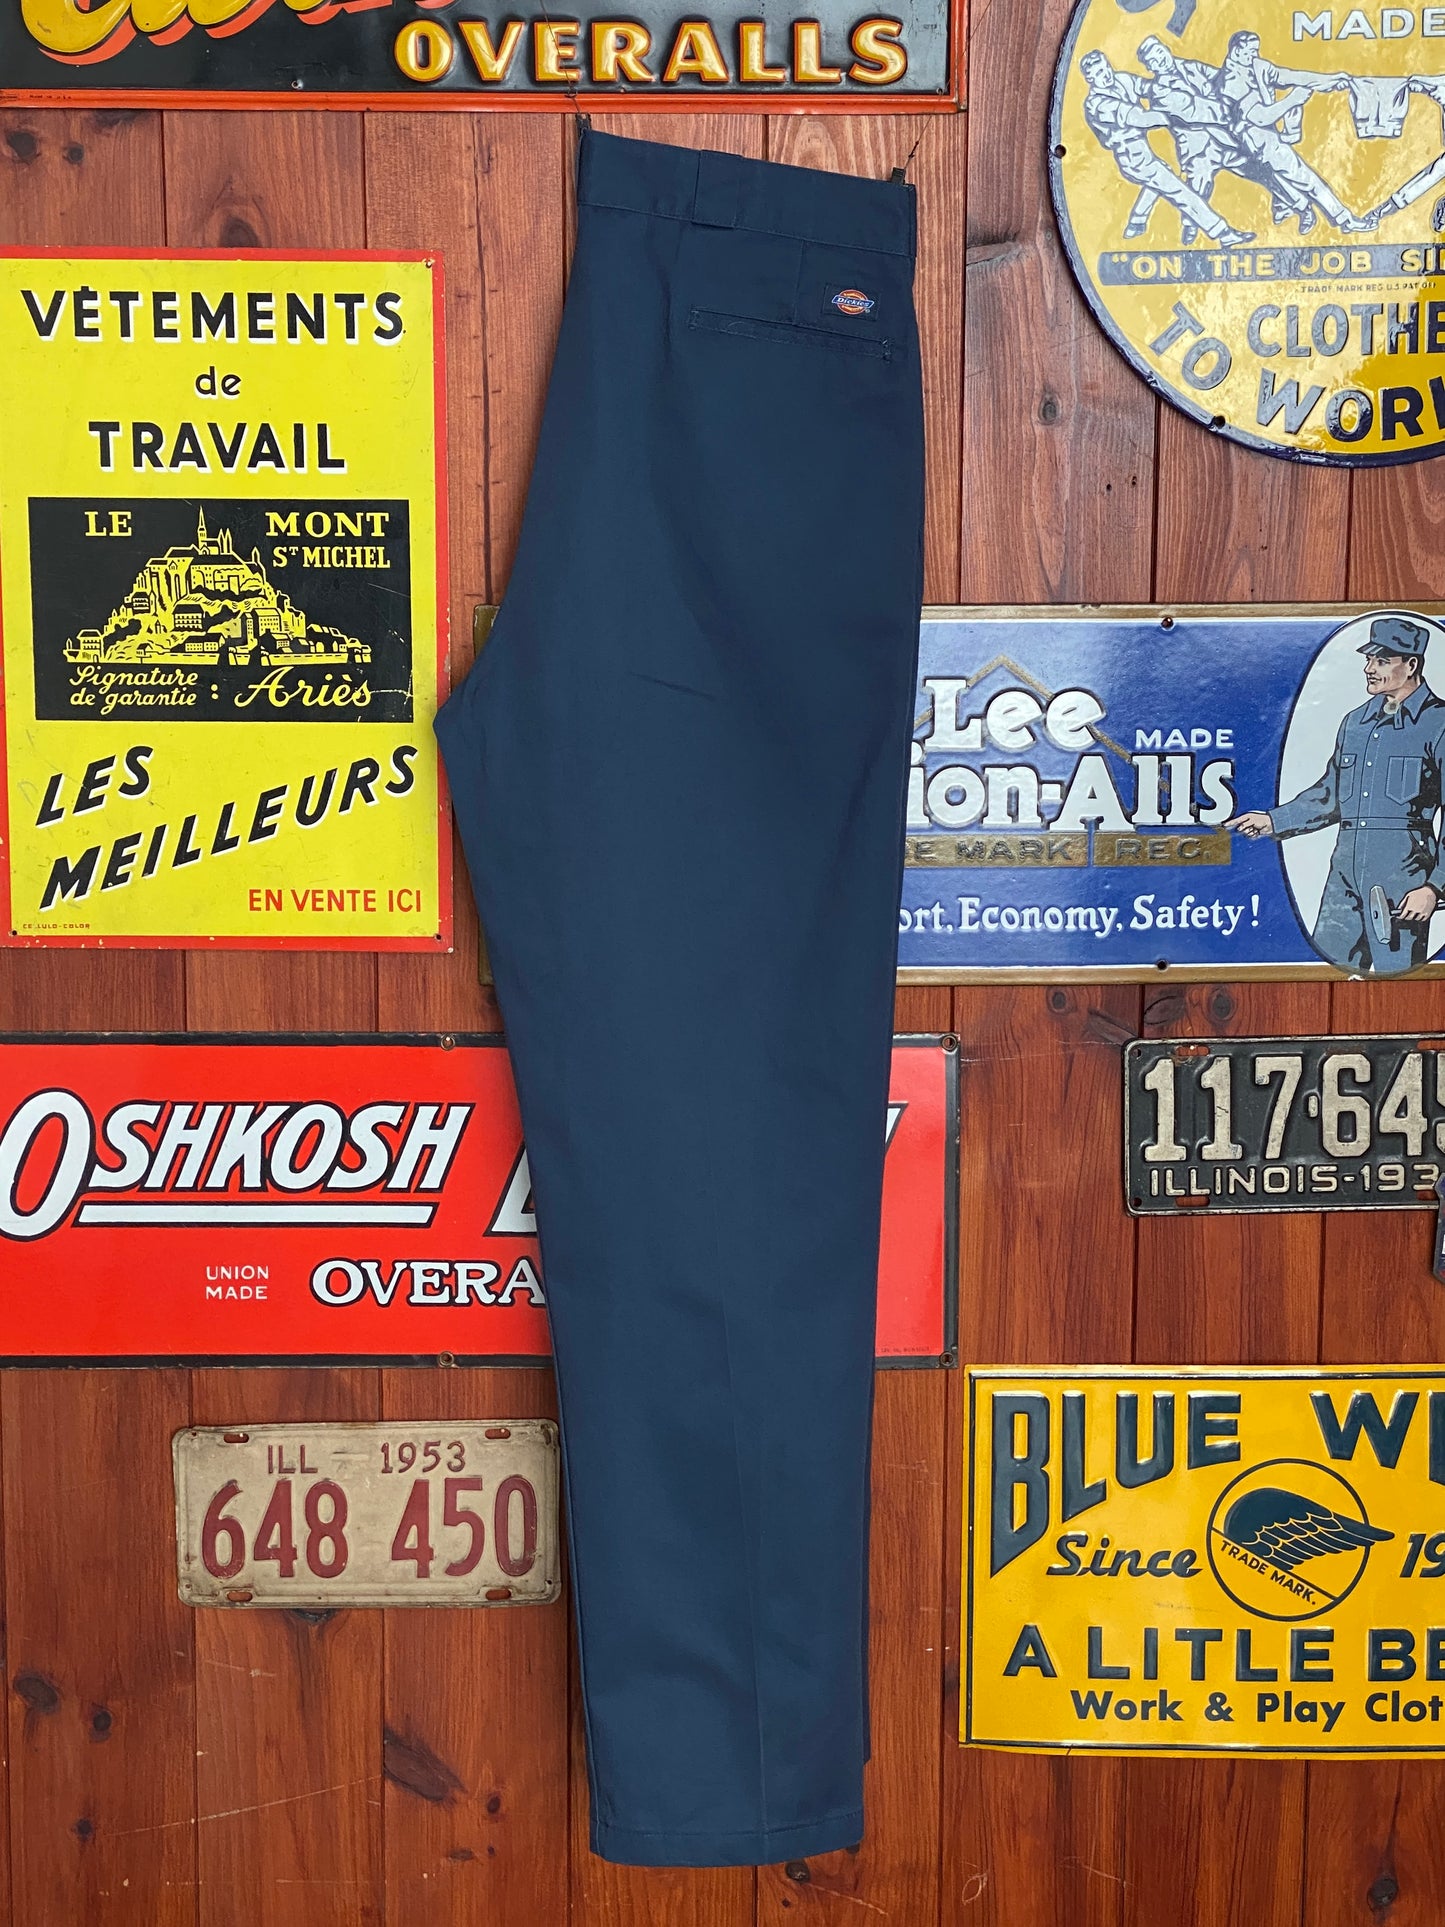 Blue Vintage Dickies Pants Model 874 Size 38X34 | Classic Workwear Apparel